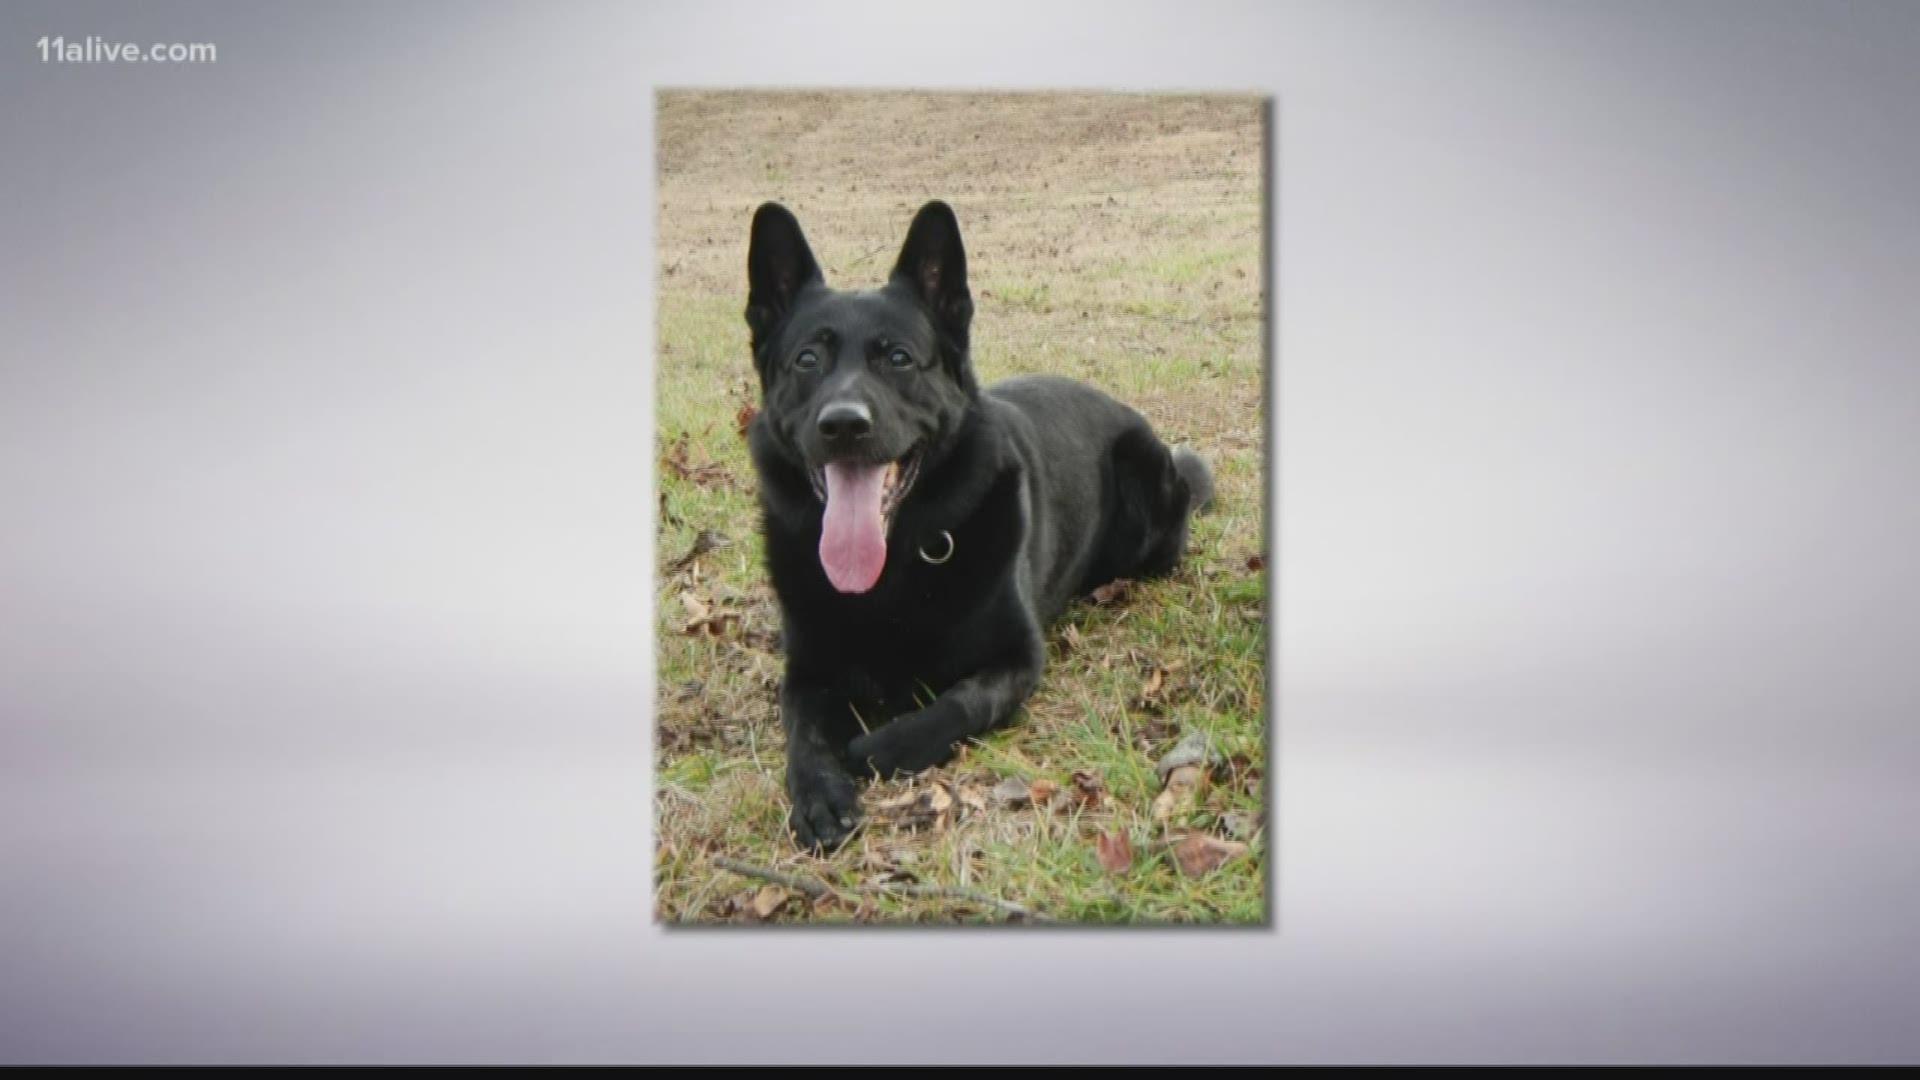 The retired K-9 ultimately passed away from kidney failure.